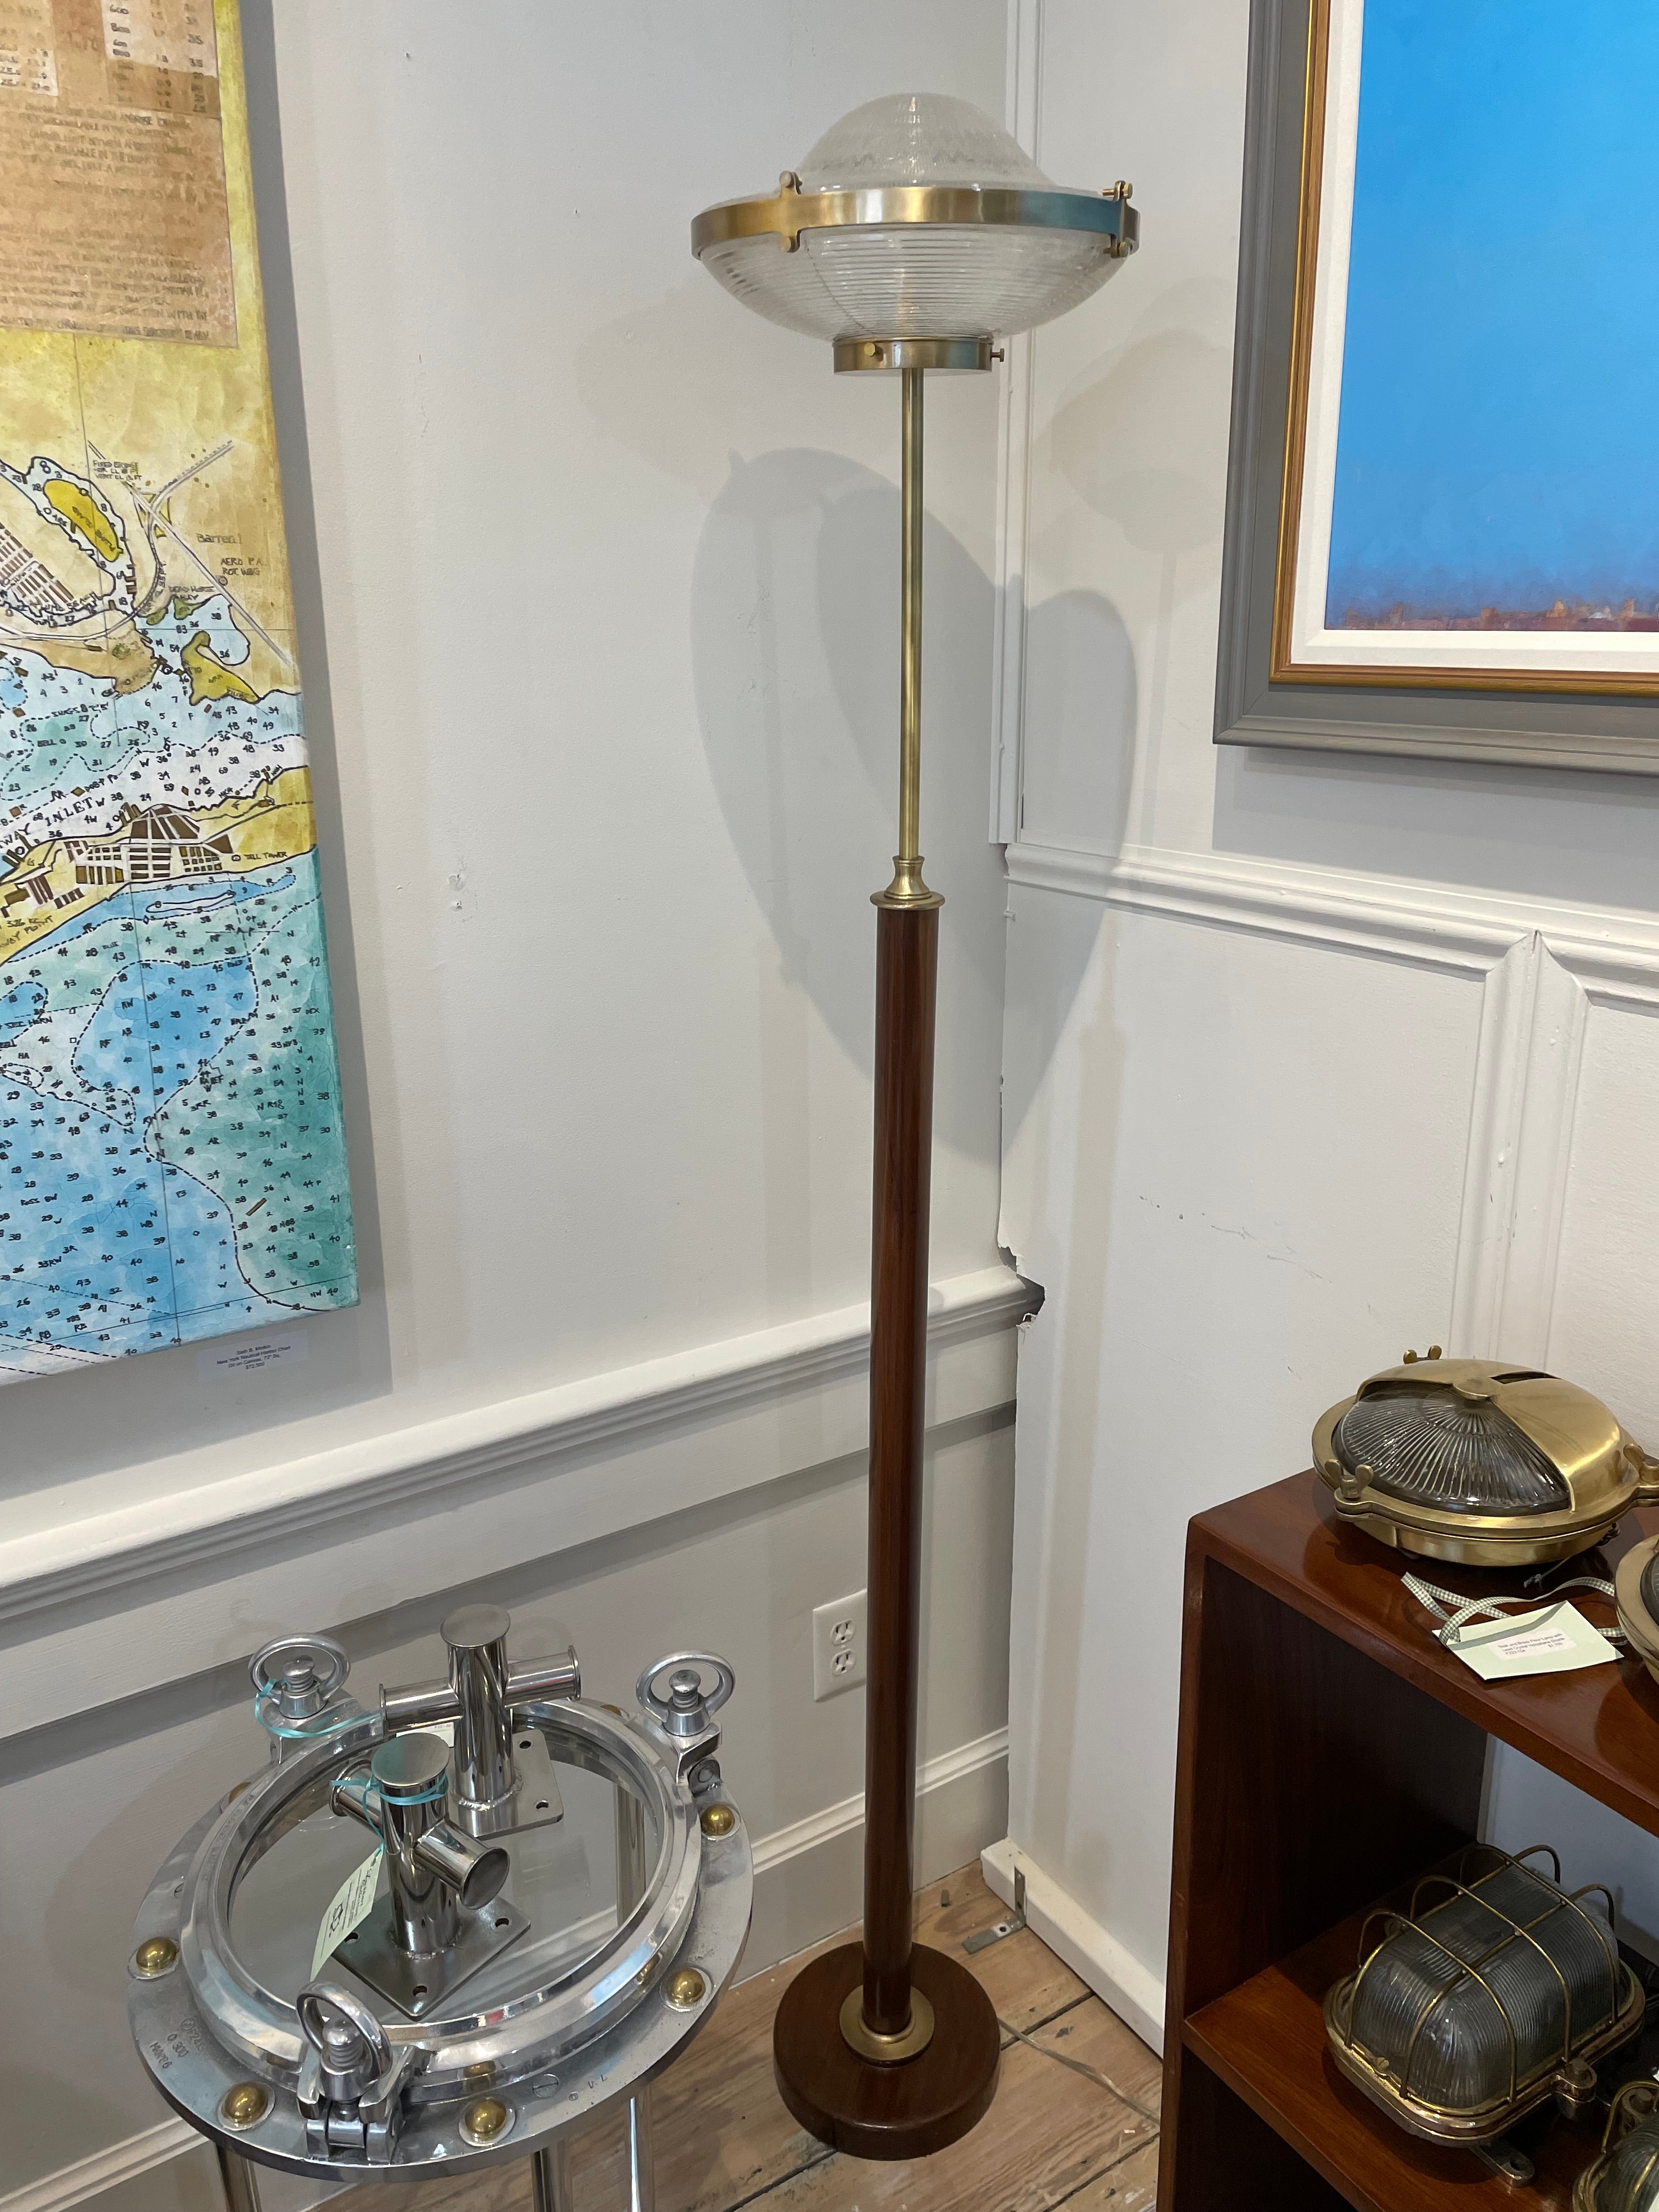 A brass and teak torchière type floor lamp with a lead crystal Holophane shade. The teak base has a 2